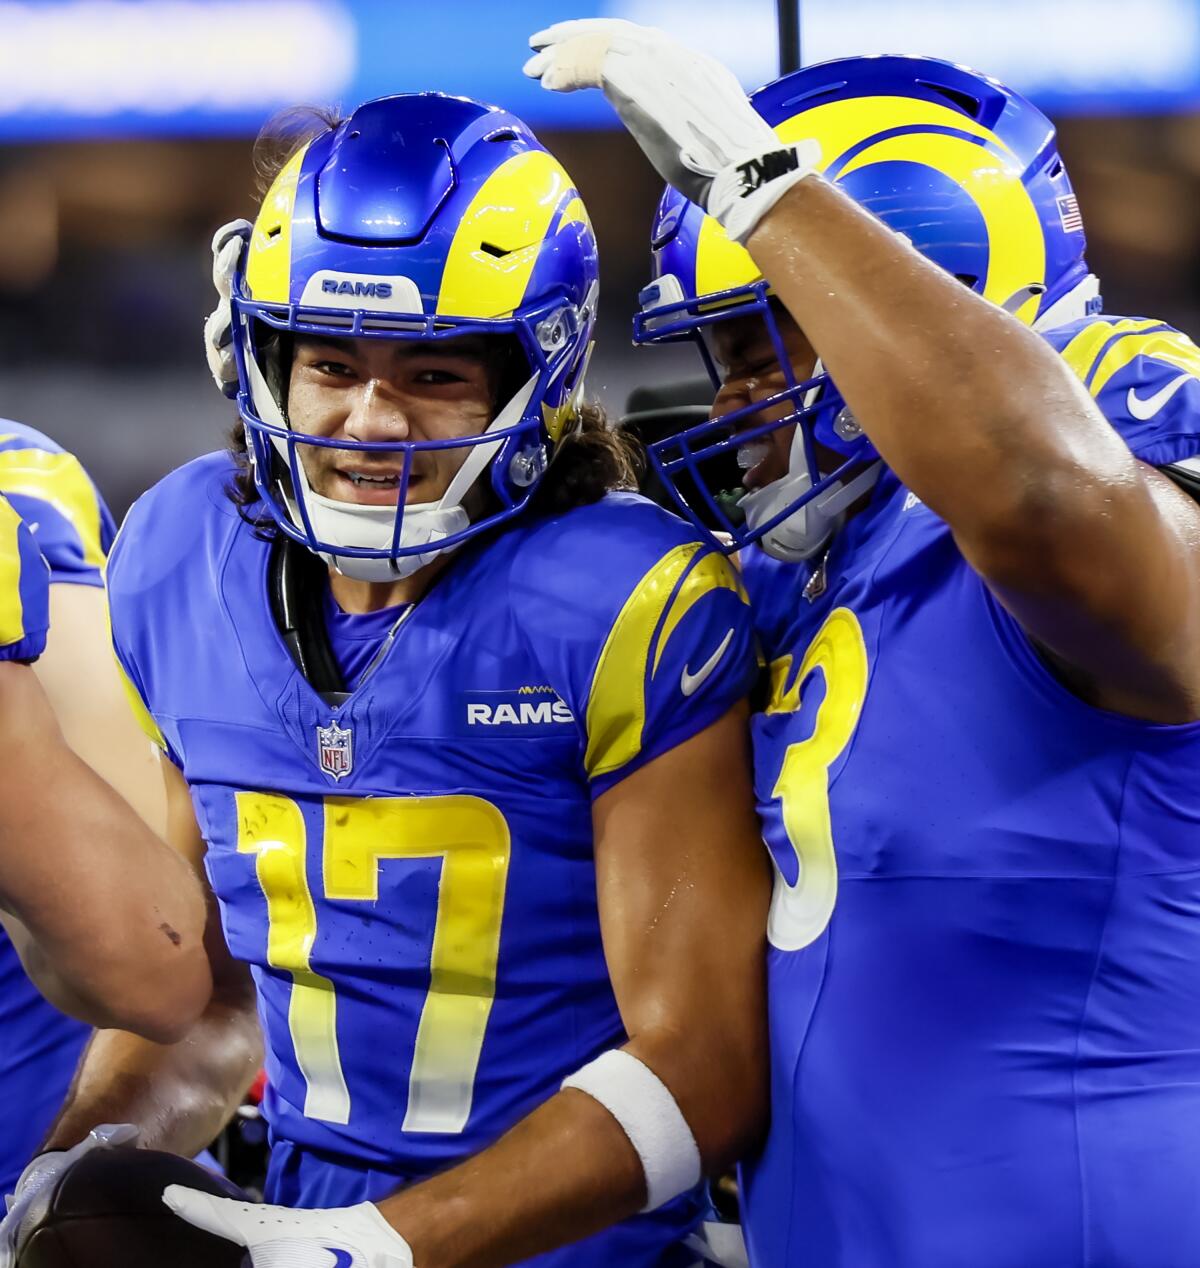 Rams wide receiver Puka Nacua, left, celebrates after catching a touchdown pass in the first quarter Thursday.